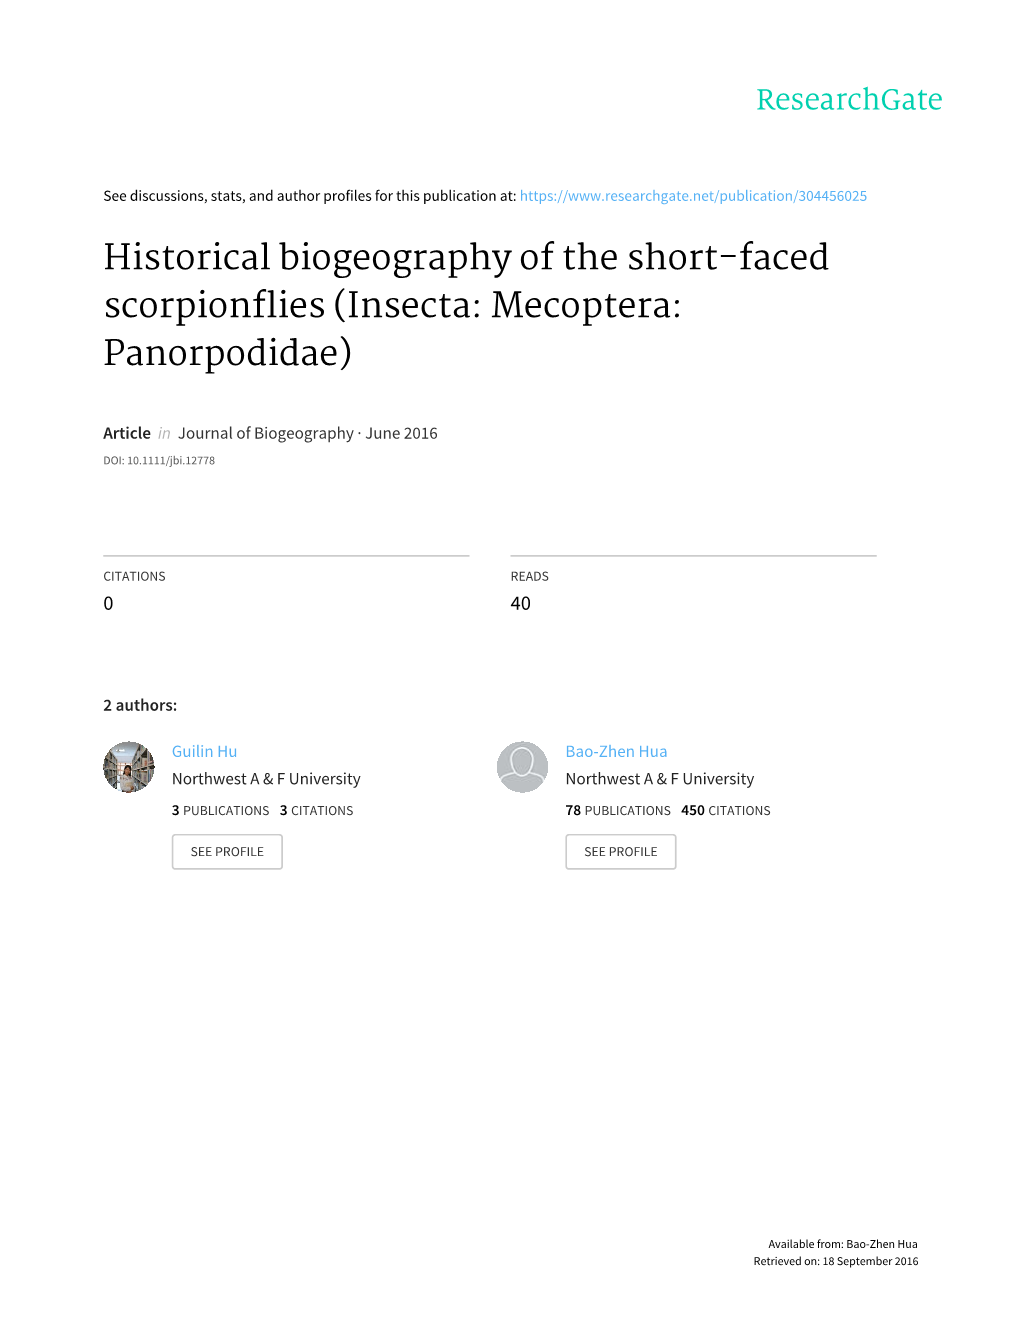 Historical Biogeography of the Short-Faced Scorpionflies (Insecta: Mecoptera: Panorpodidae)